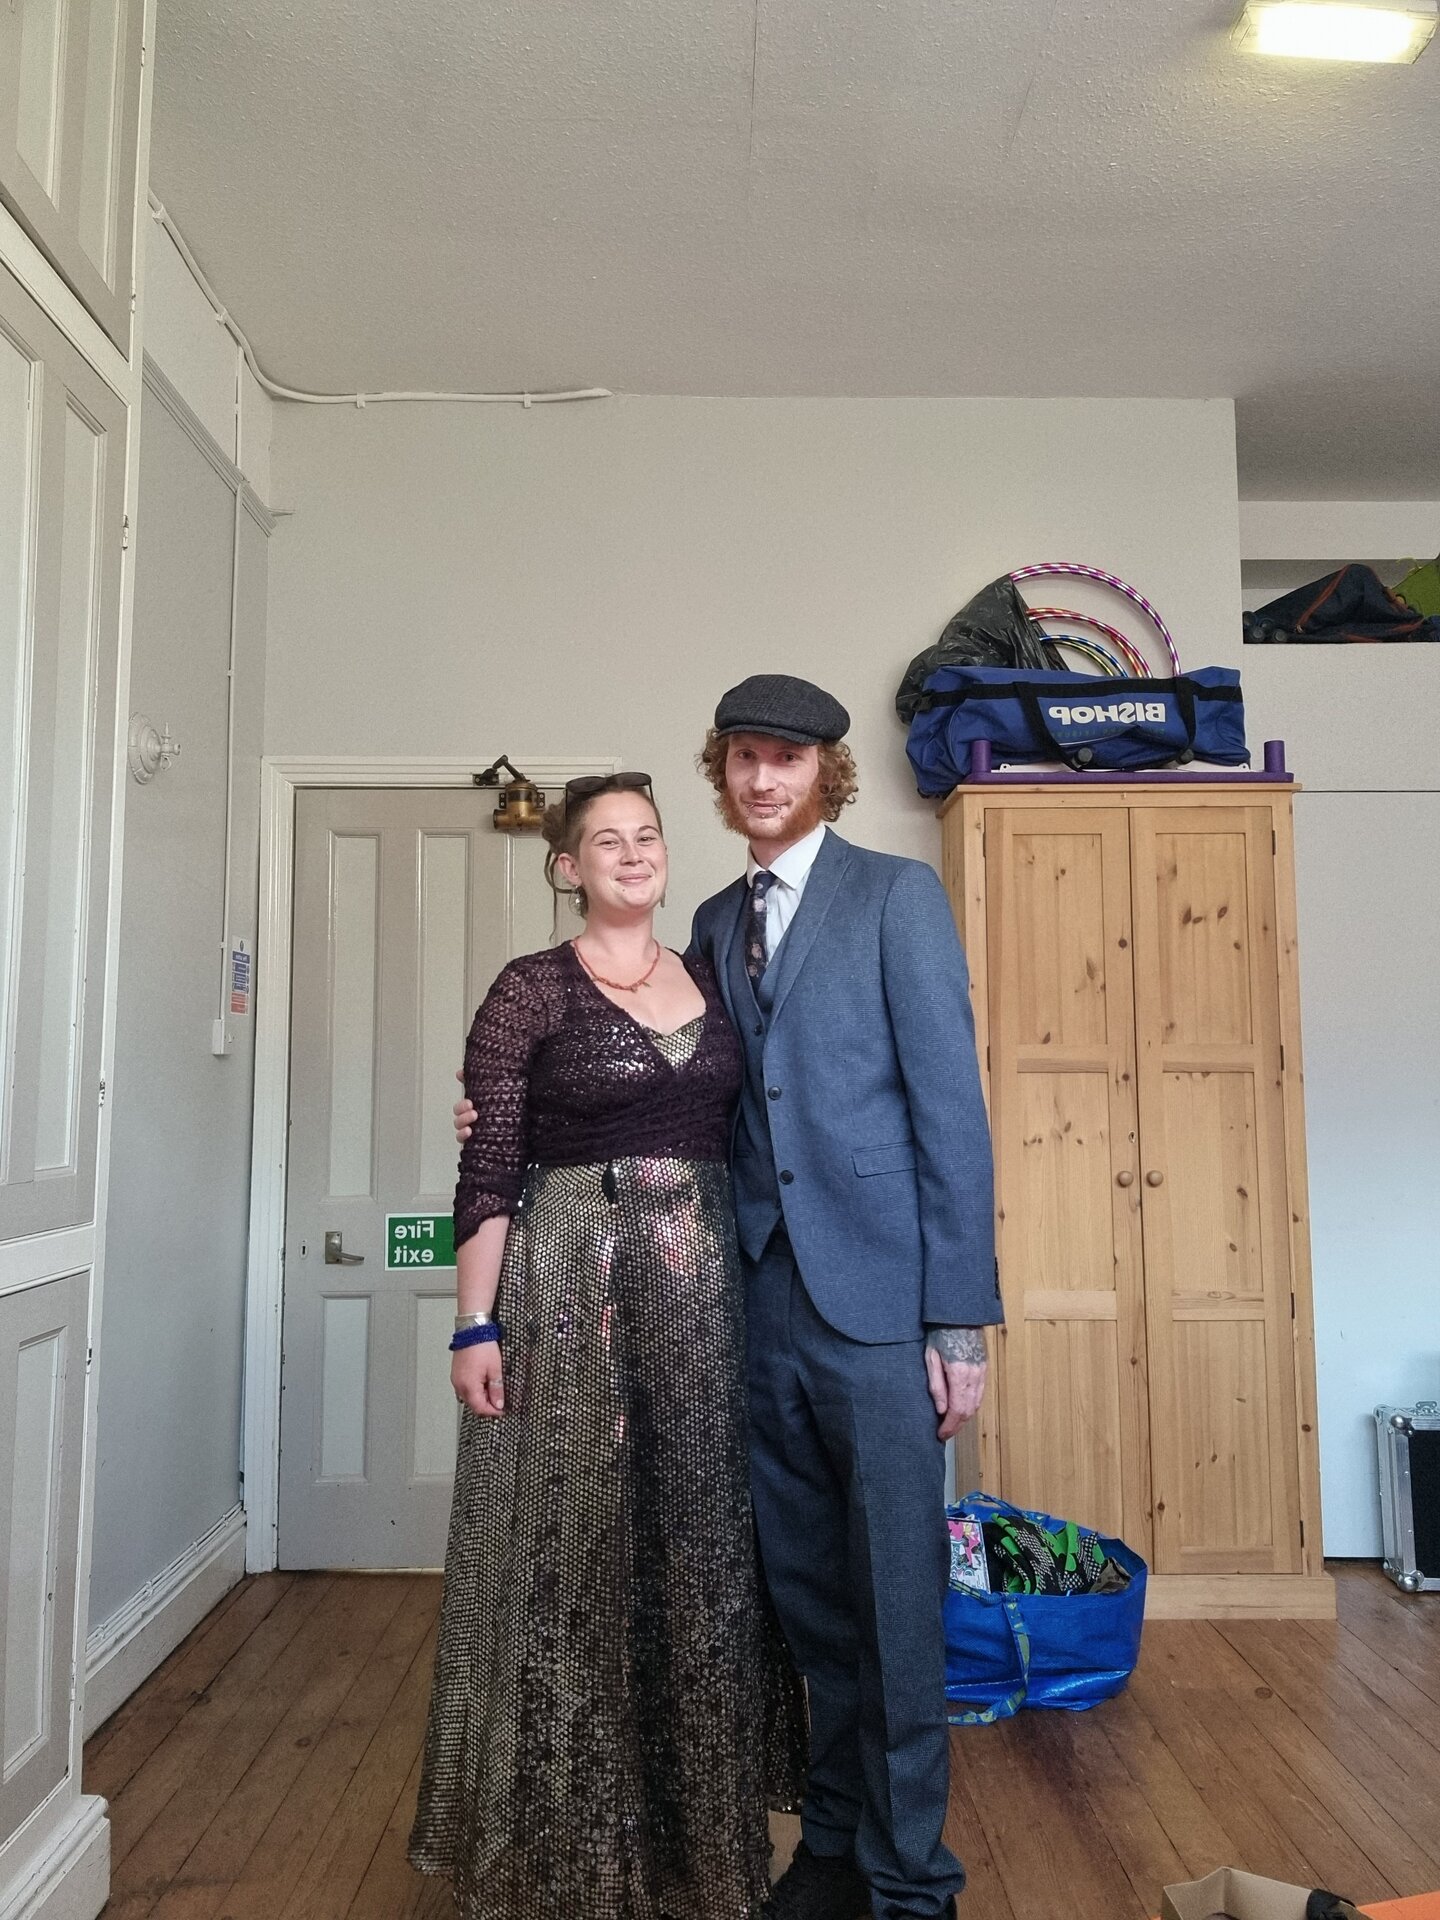 Meg and I dressed up for the wedding party